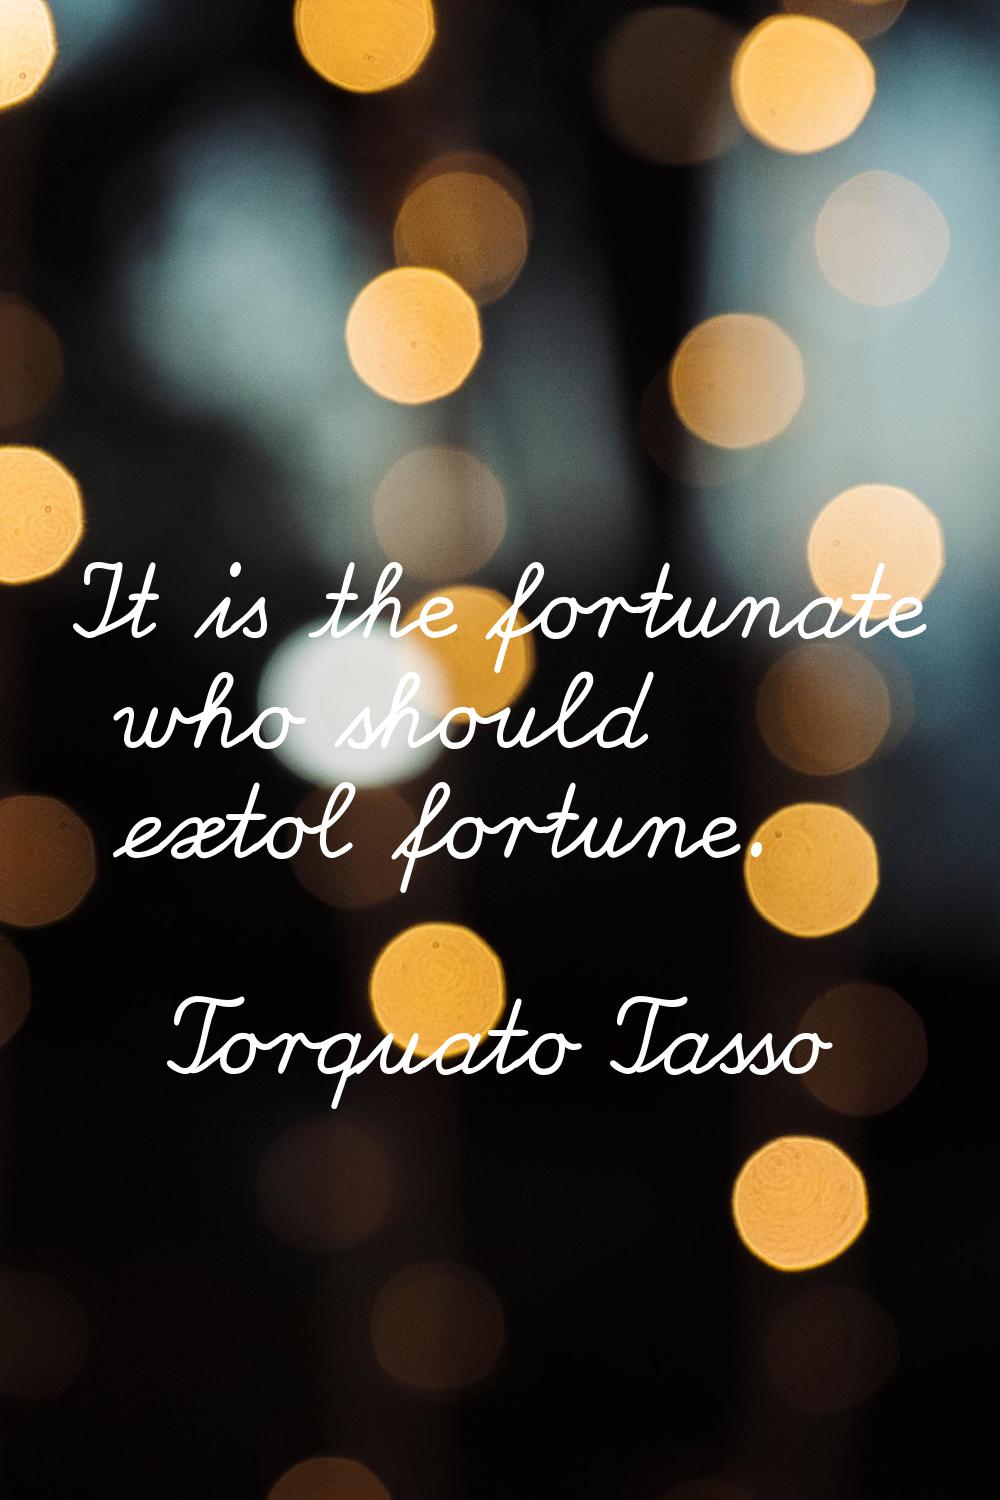 It is the fortunate who should extol fortune.